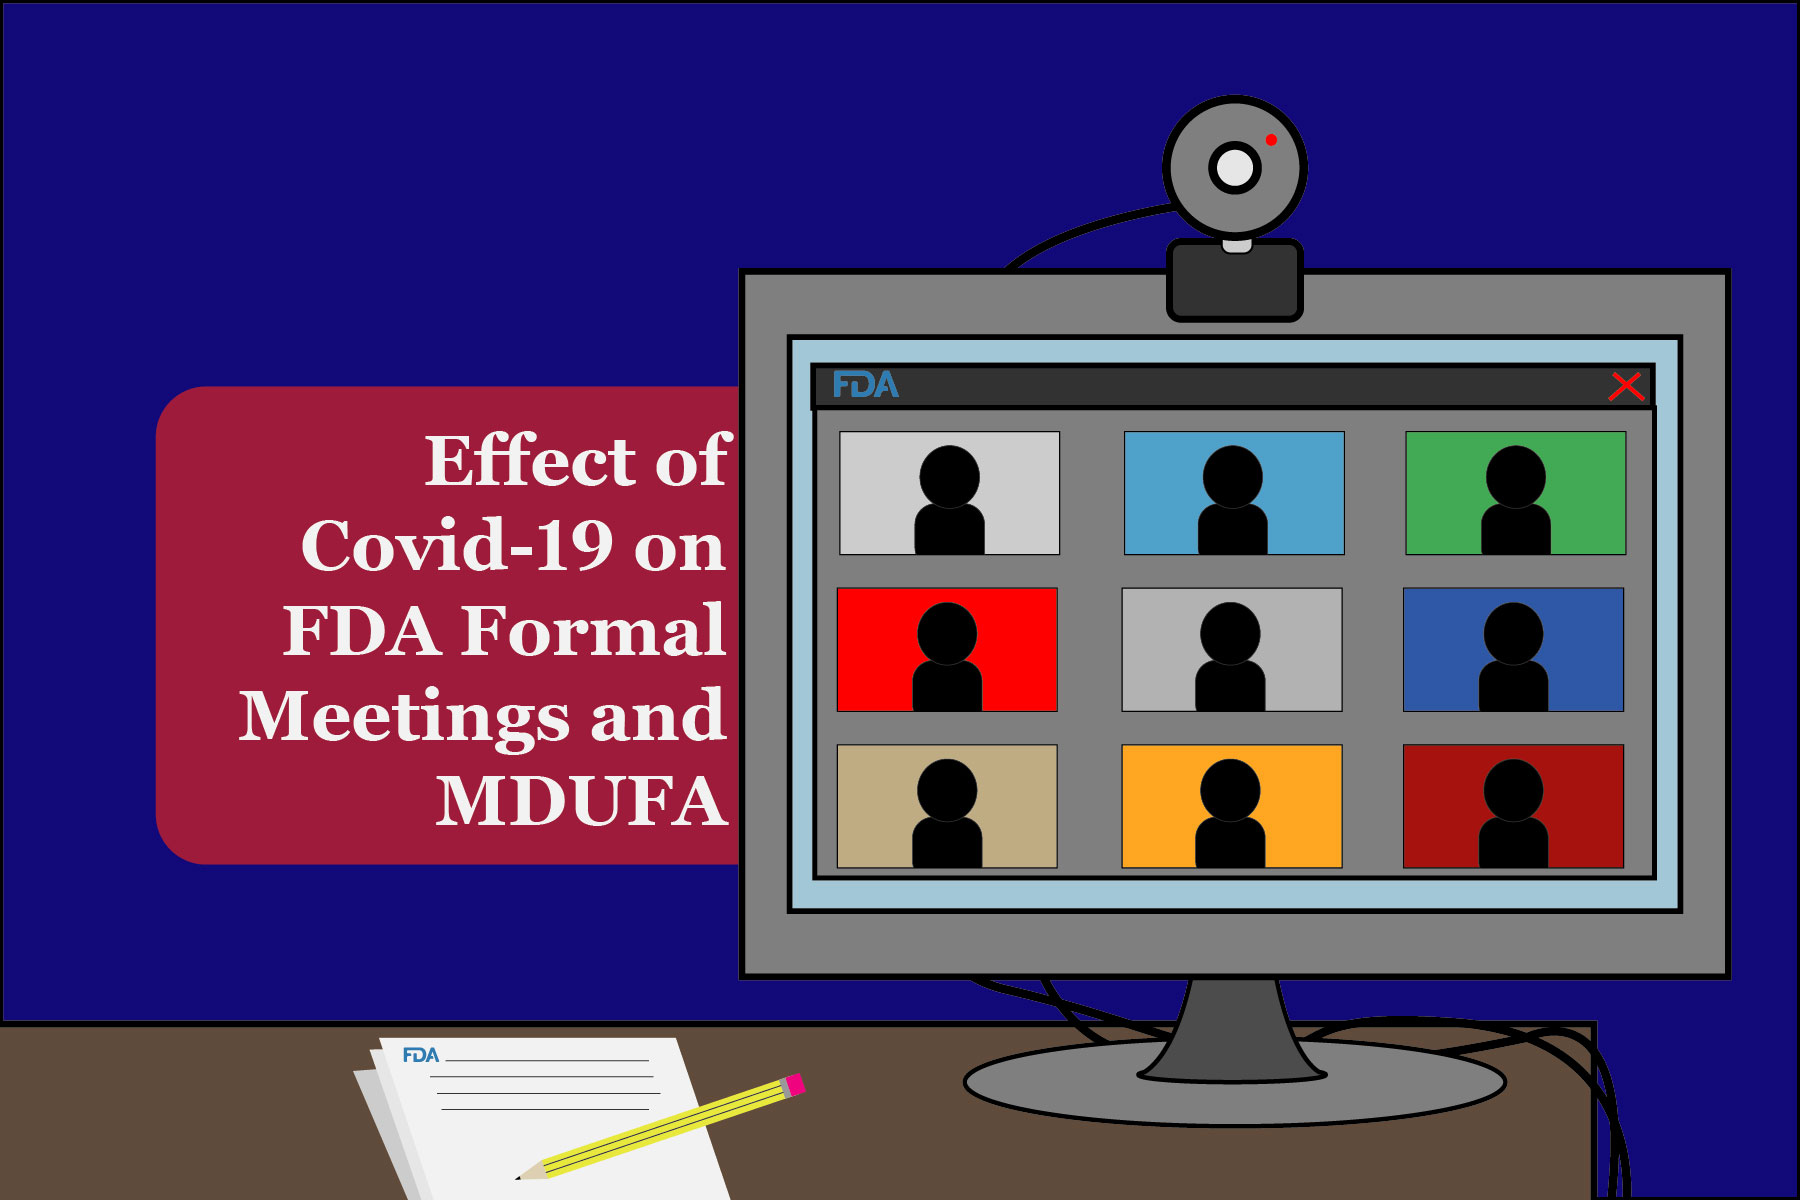 Effect of Covid-19 on FDA Formal Meetings and MDUFA